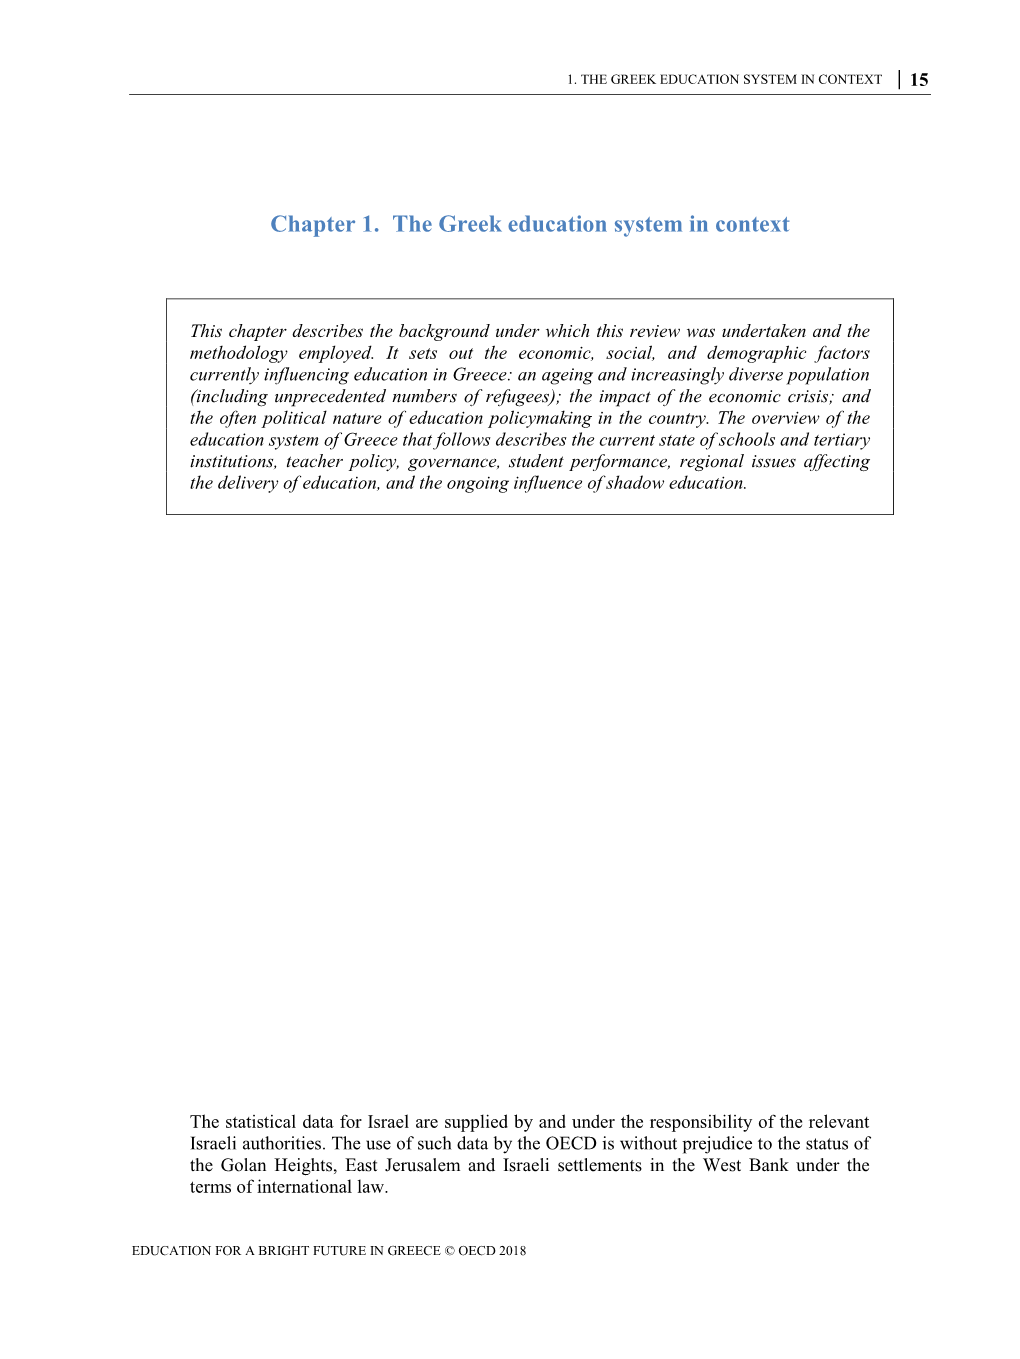 Chapter 1. the Greek Education System in Context